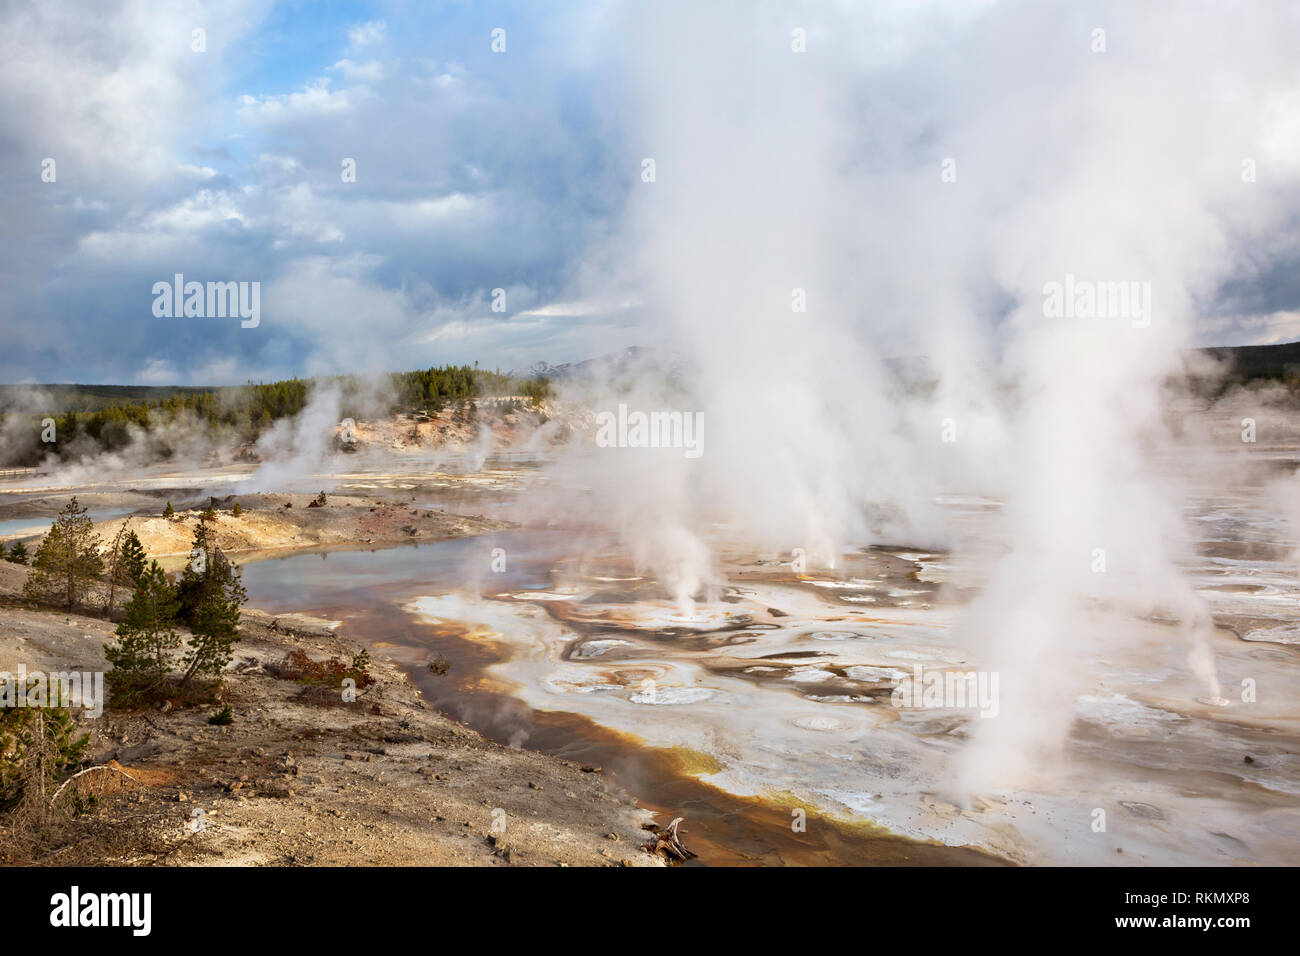 WY03428-00...WYOMING - Patterns and steam made by the fumerals and hot springs in the Porcelain Basin area of Norris Geyser Basin in Yellowstone Natio Stock Photo